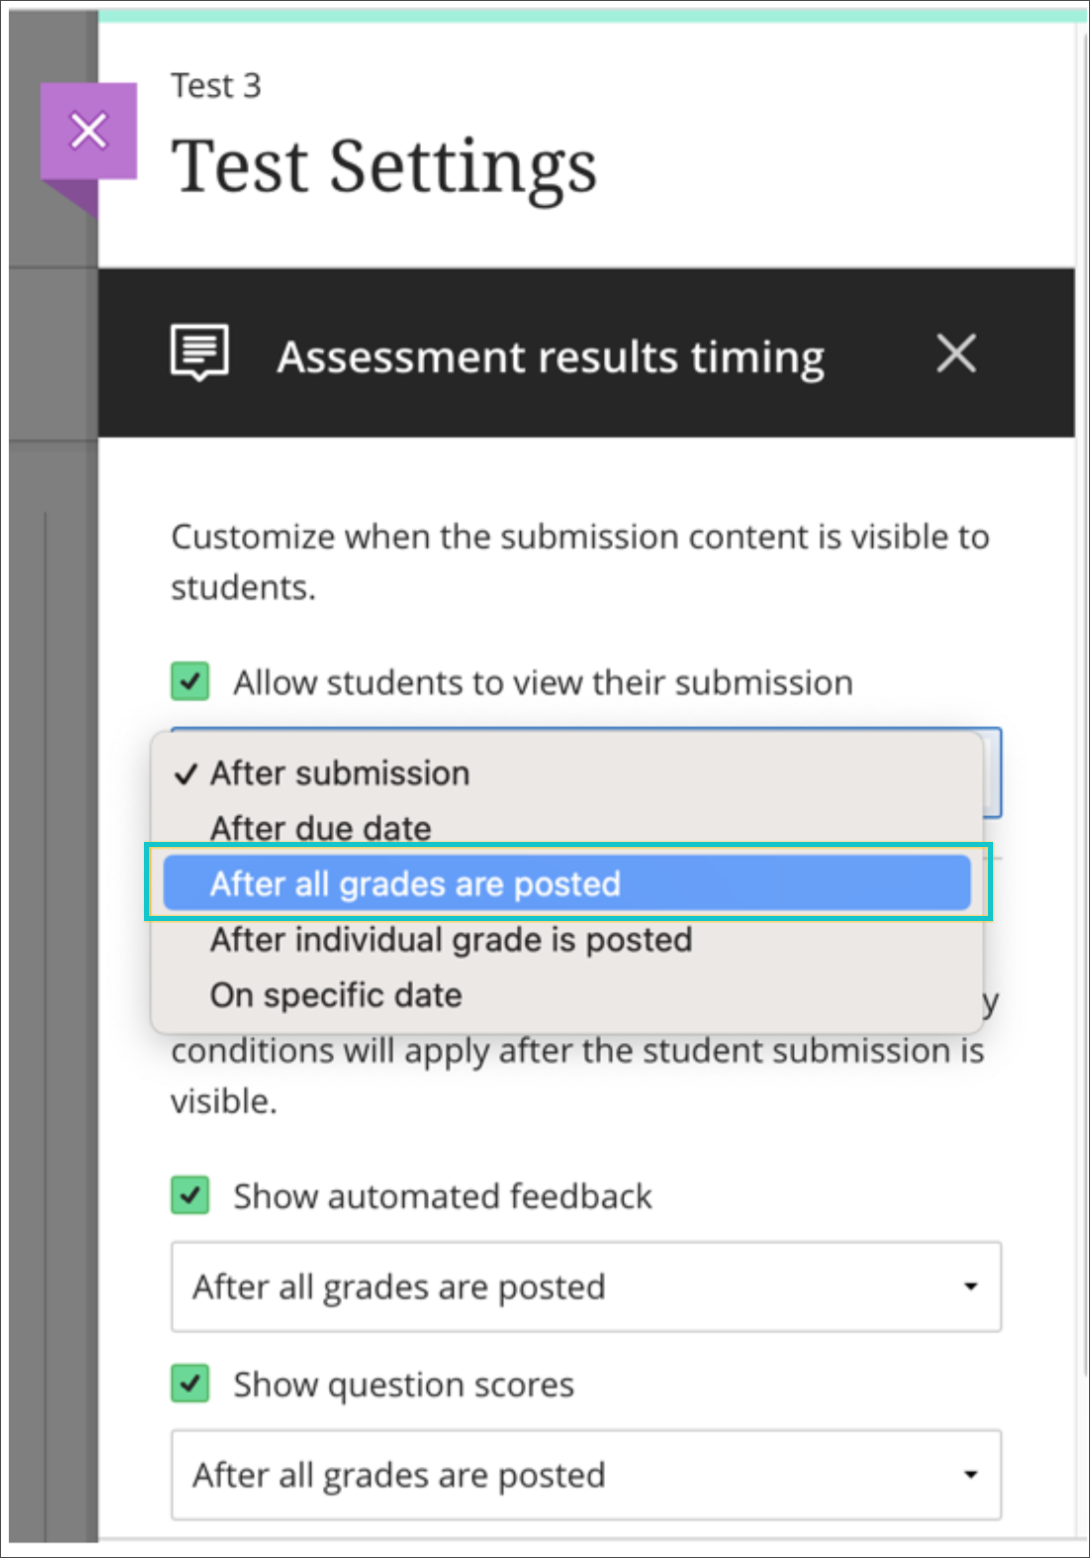 The instructor should select the "After all grades are posted” option